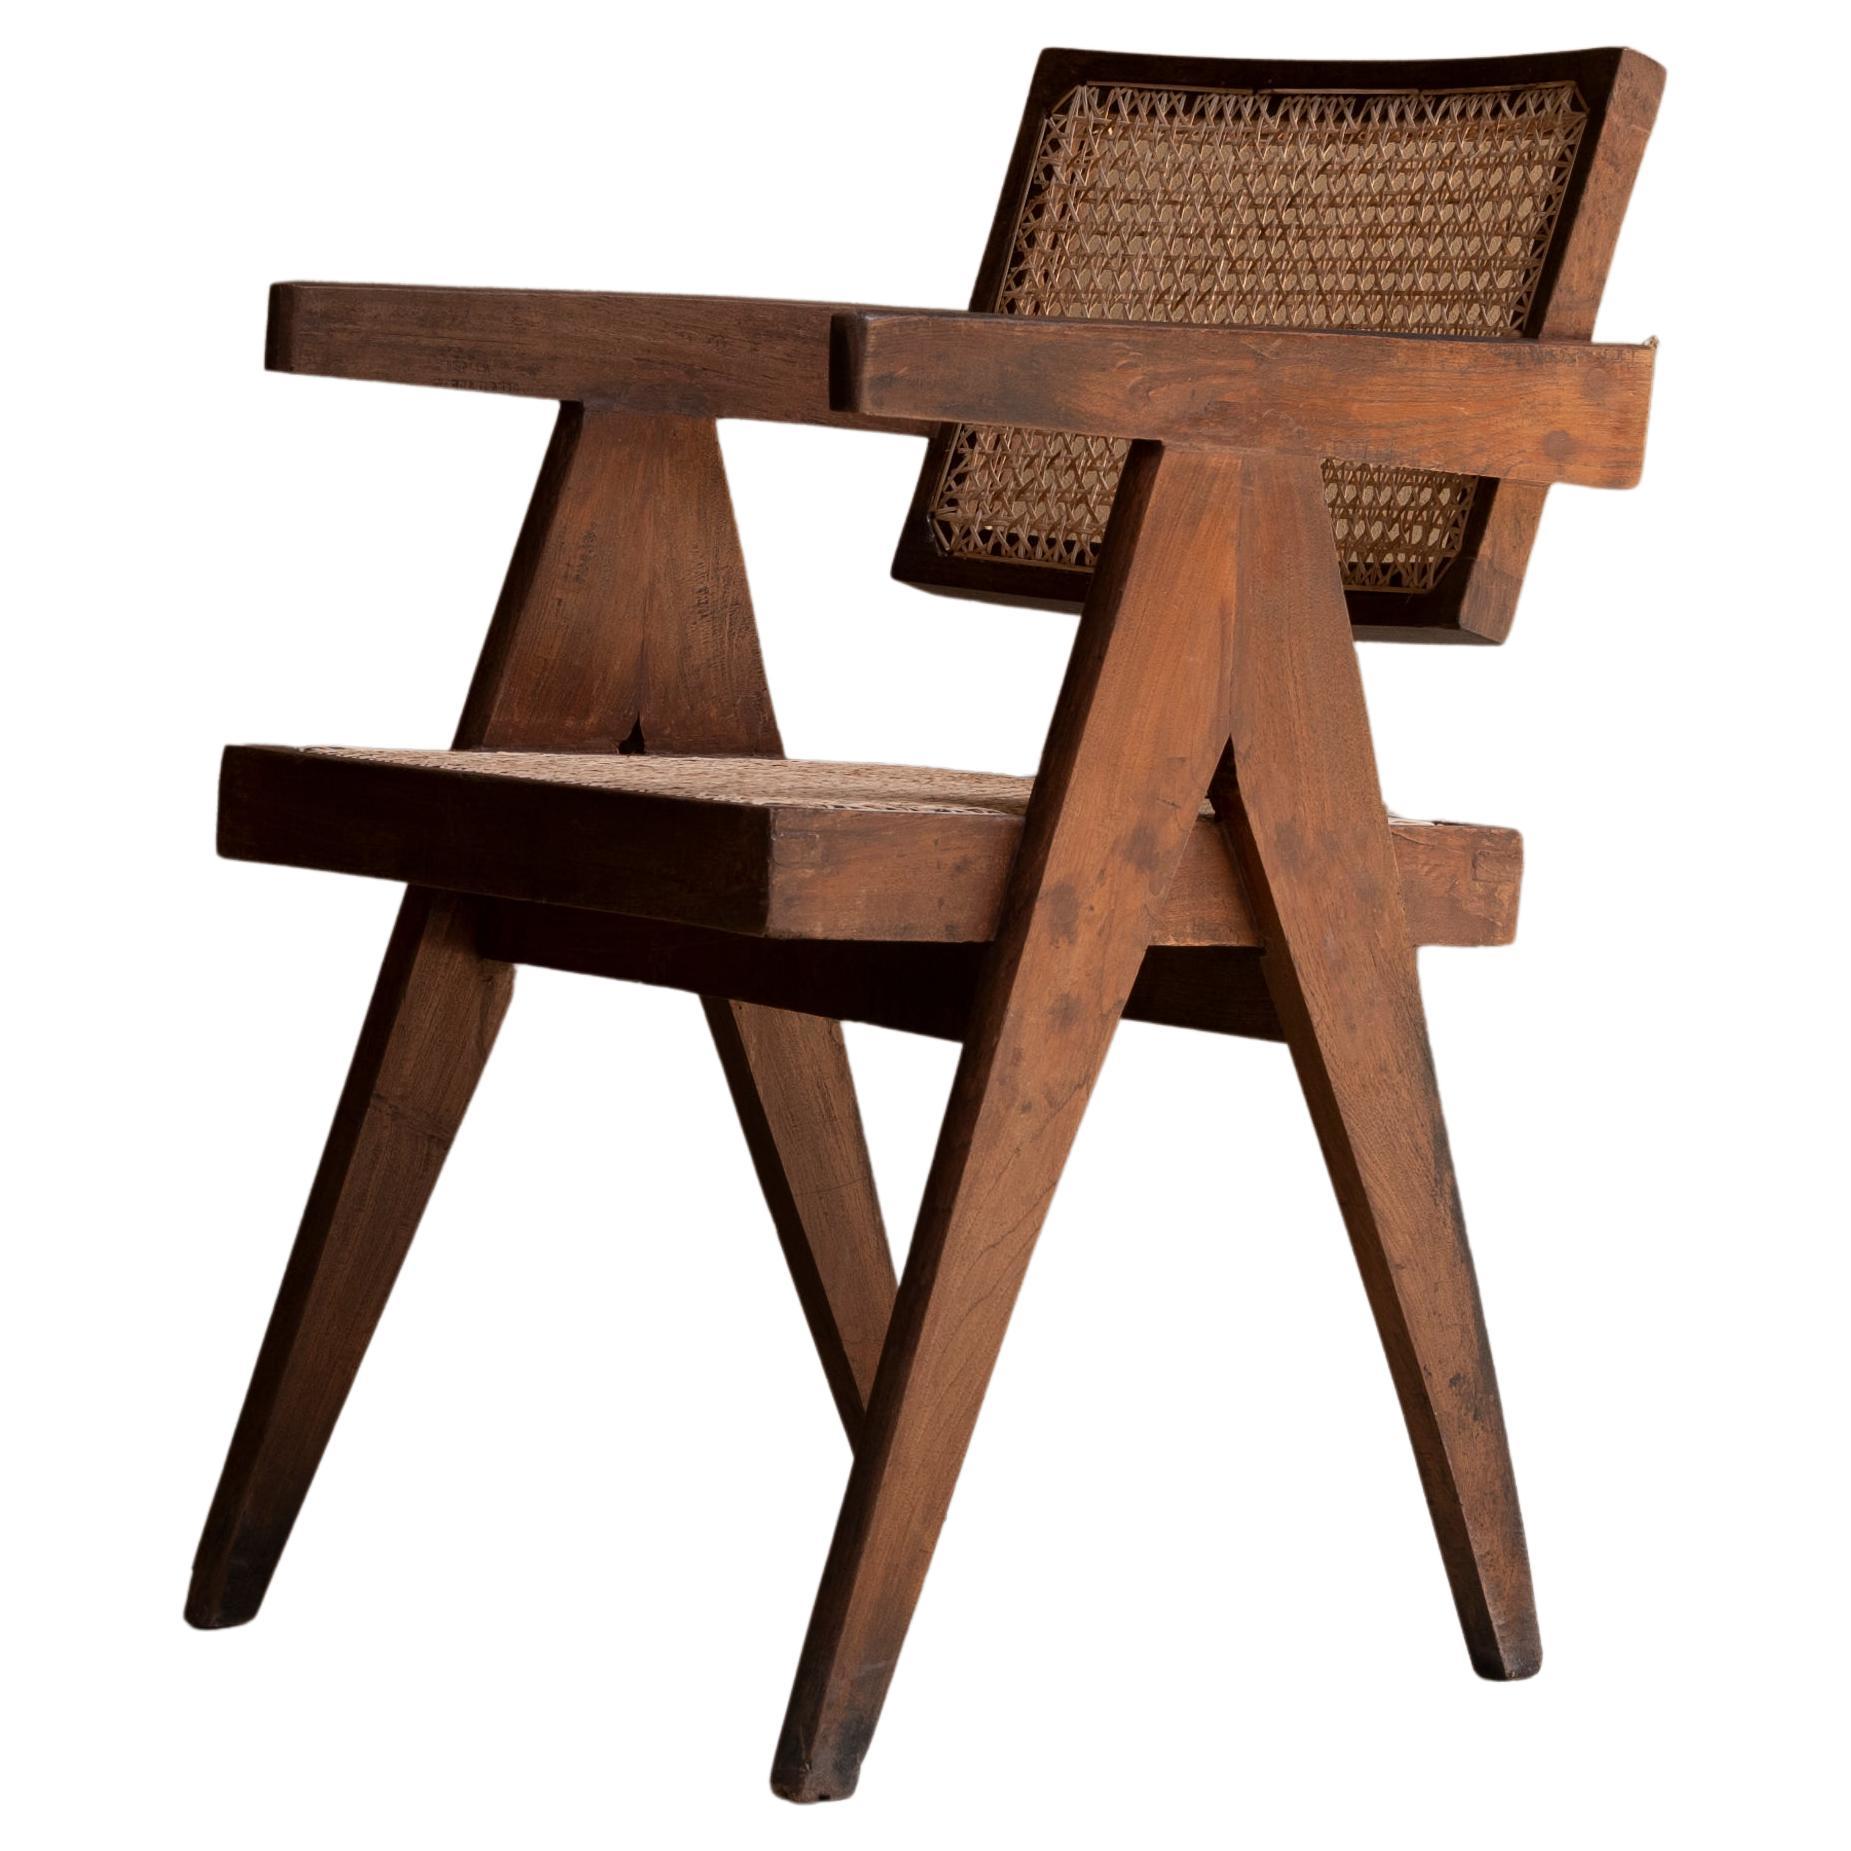 Pierre Jeanneret Office Chair, Circa 1955-56, Punjab Agricultural University